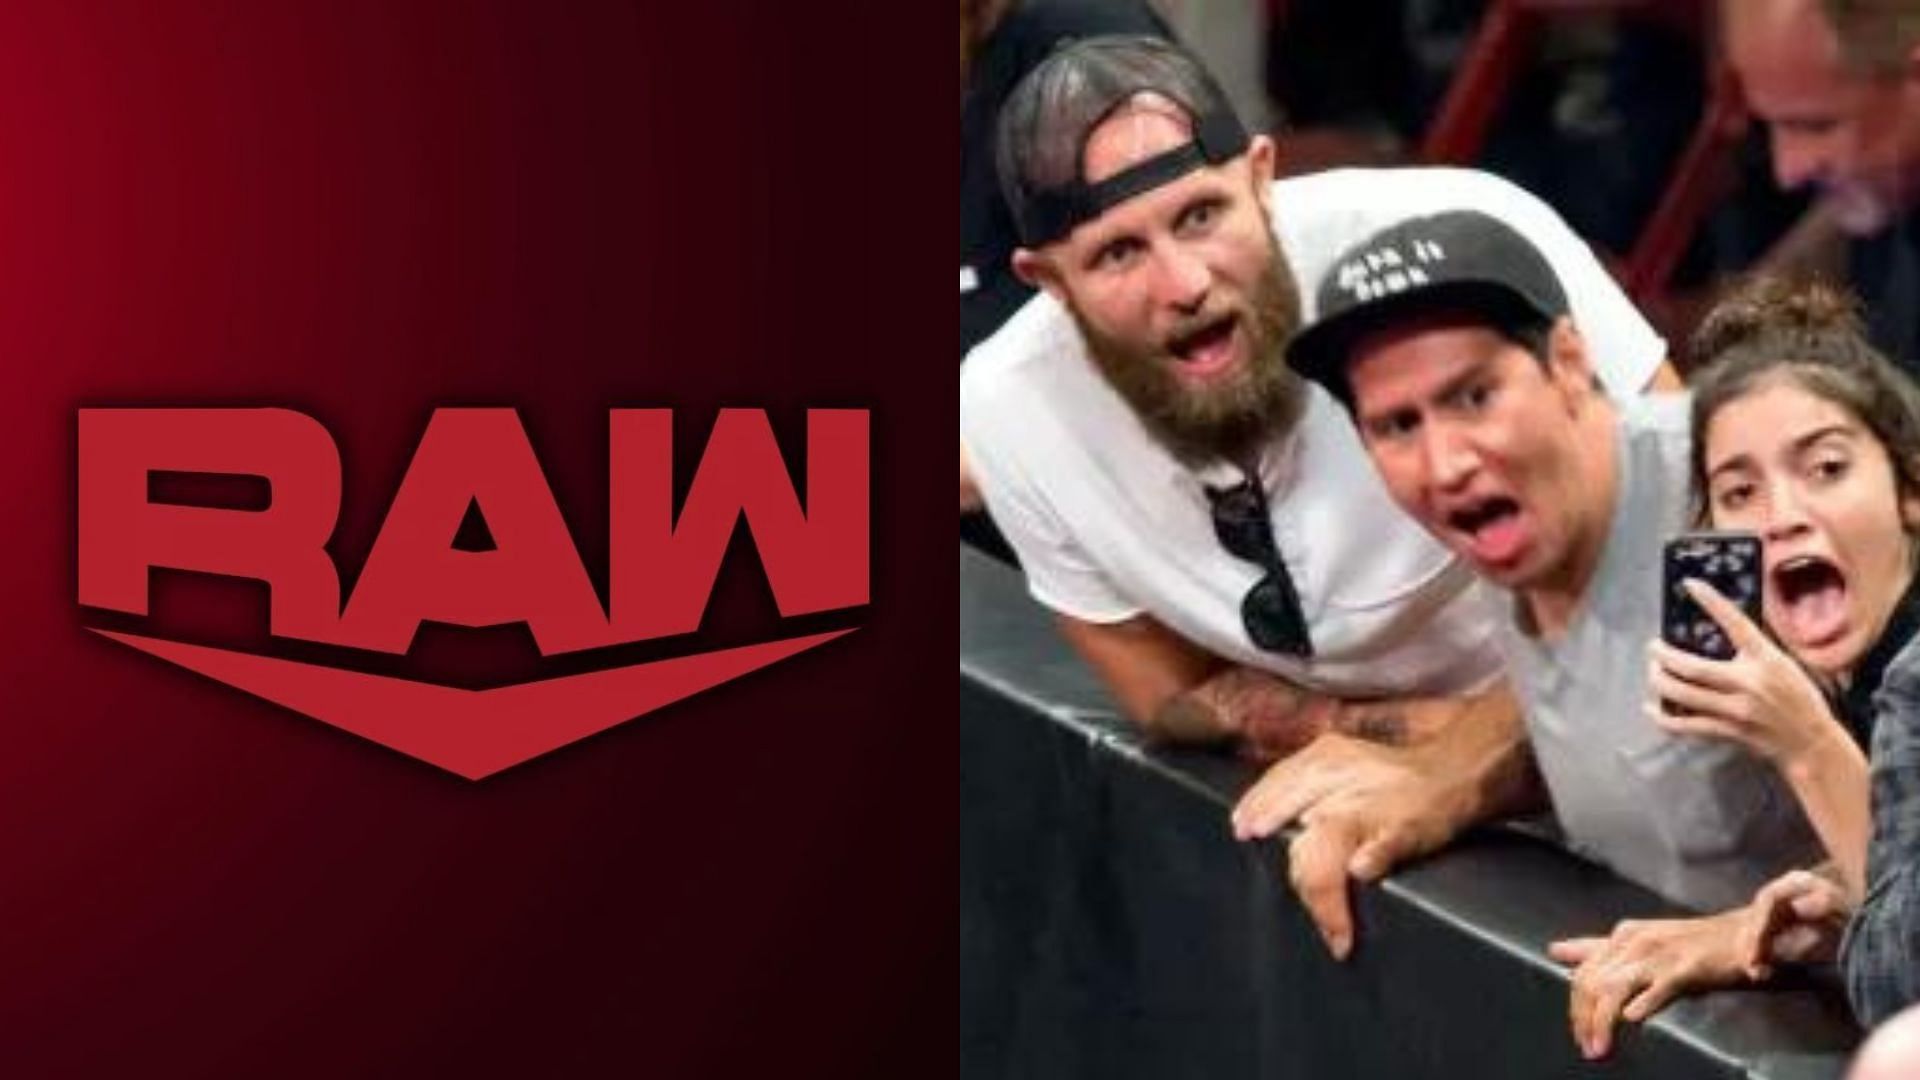 WWE RAW aired live last night in Albany, New York. 